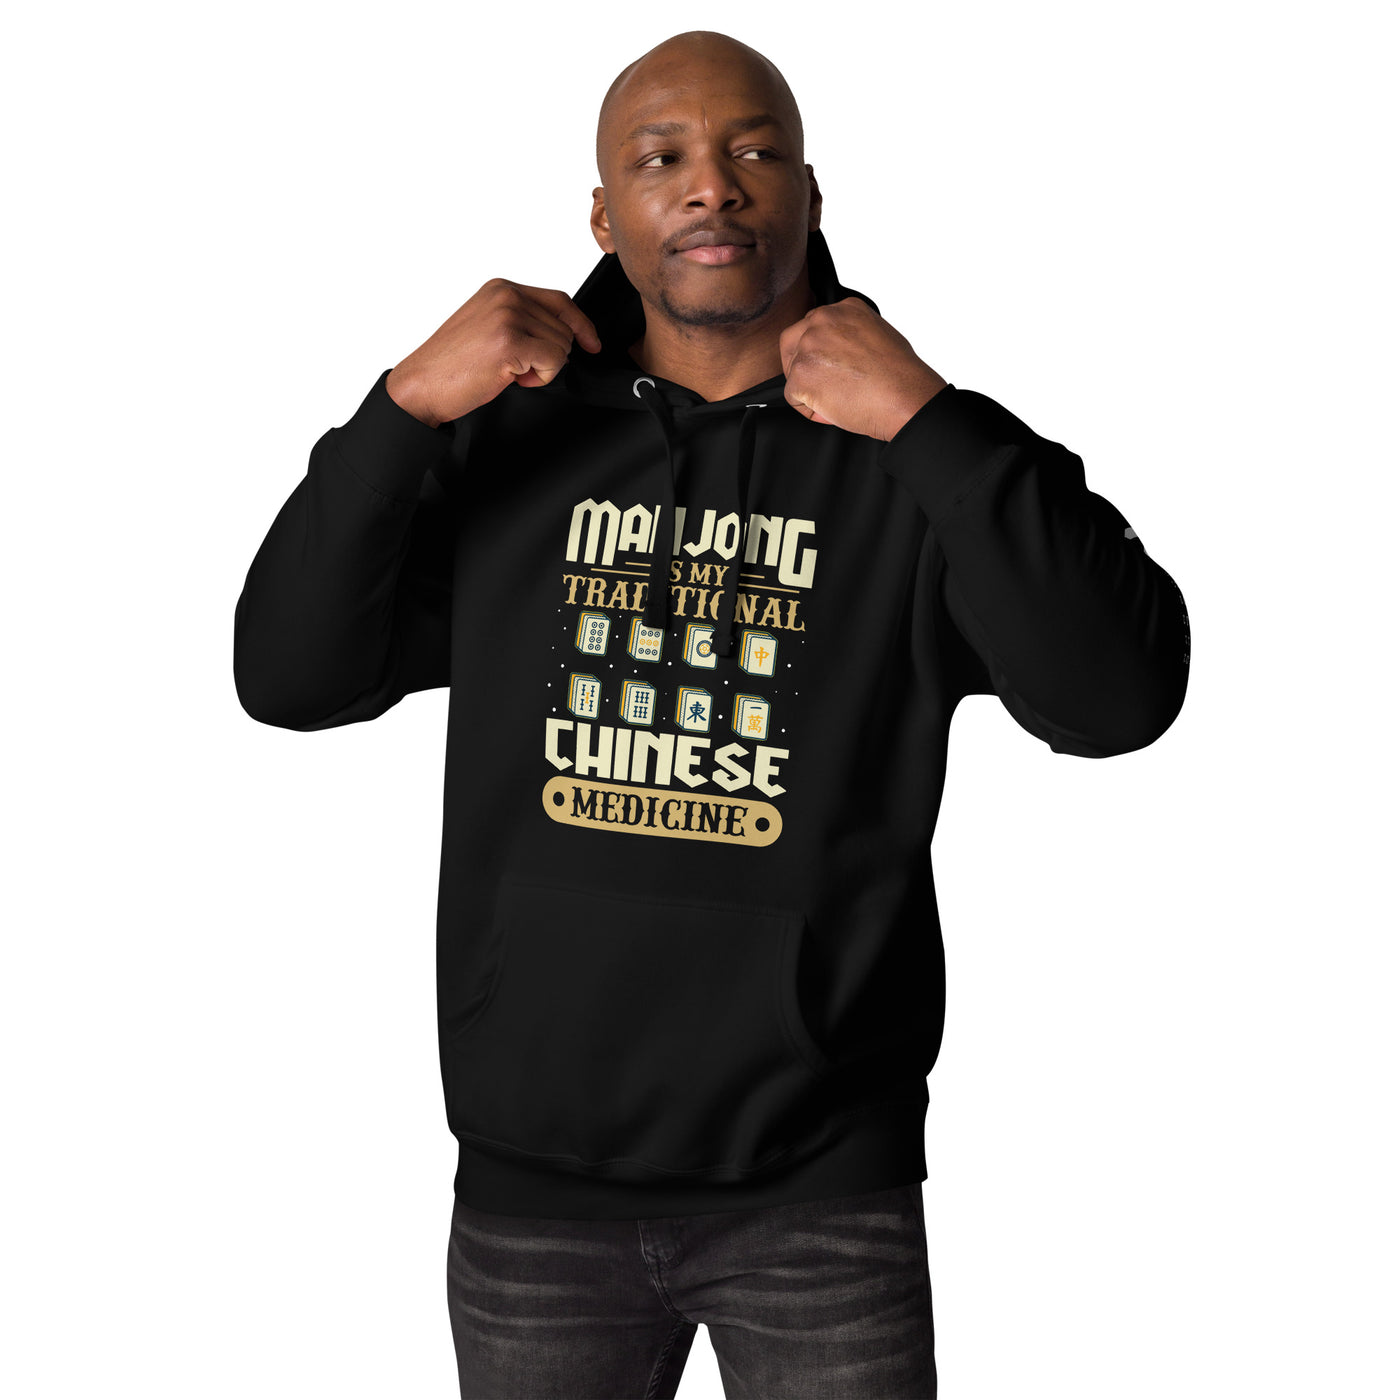 Mahjong is my Traditional Chinese Medicine - Unisex Hoodie